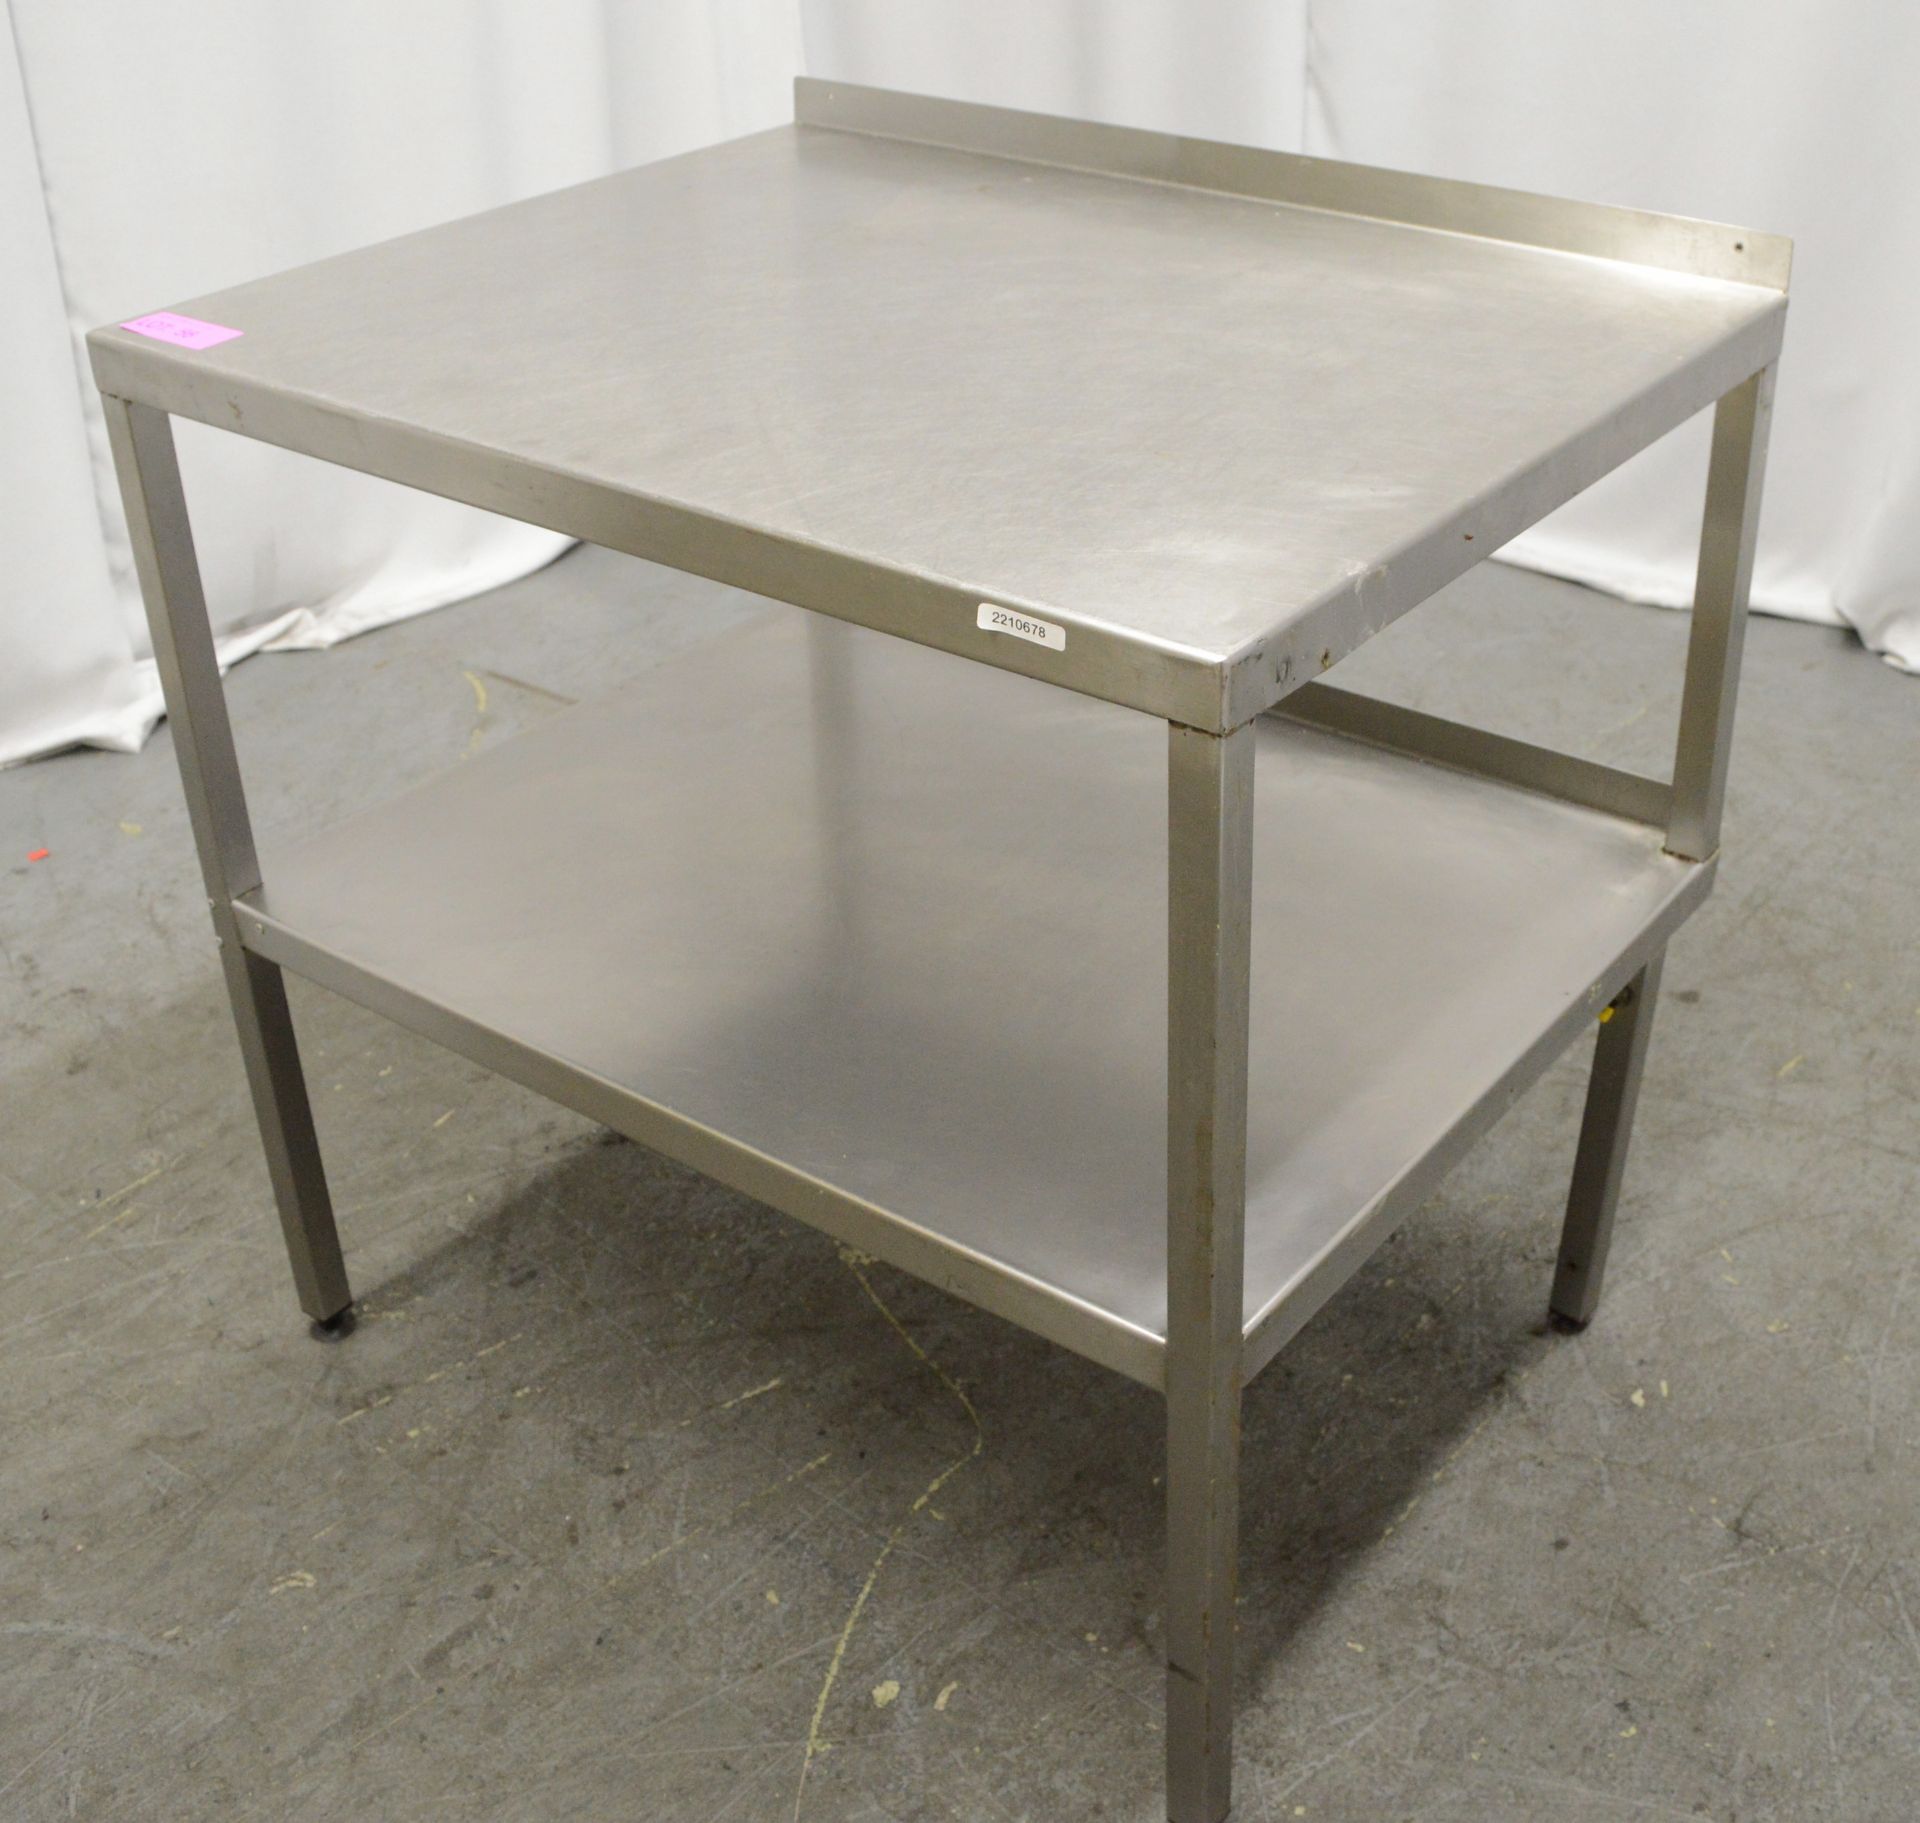 Preparation table 900mm W x 700mm D x 870mm H - Image 5 of 5